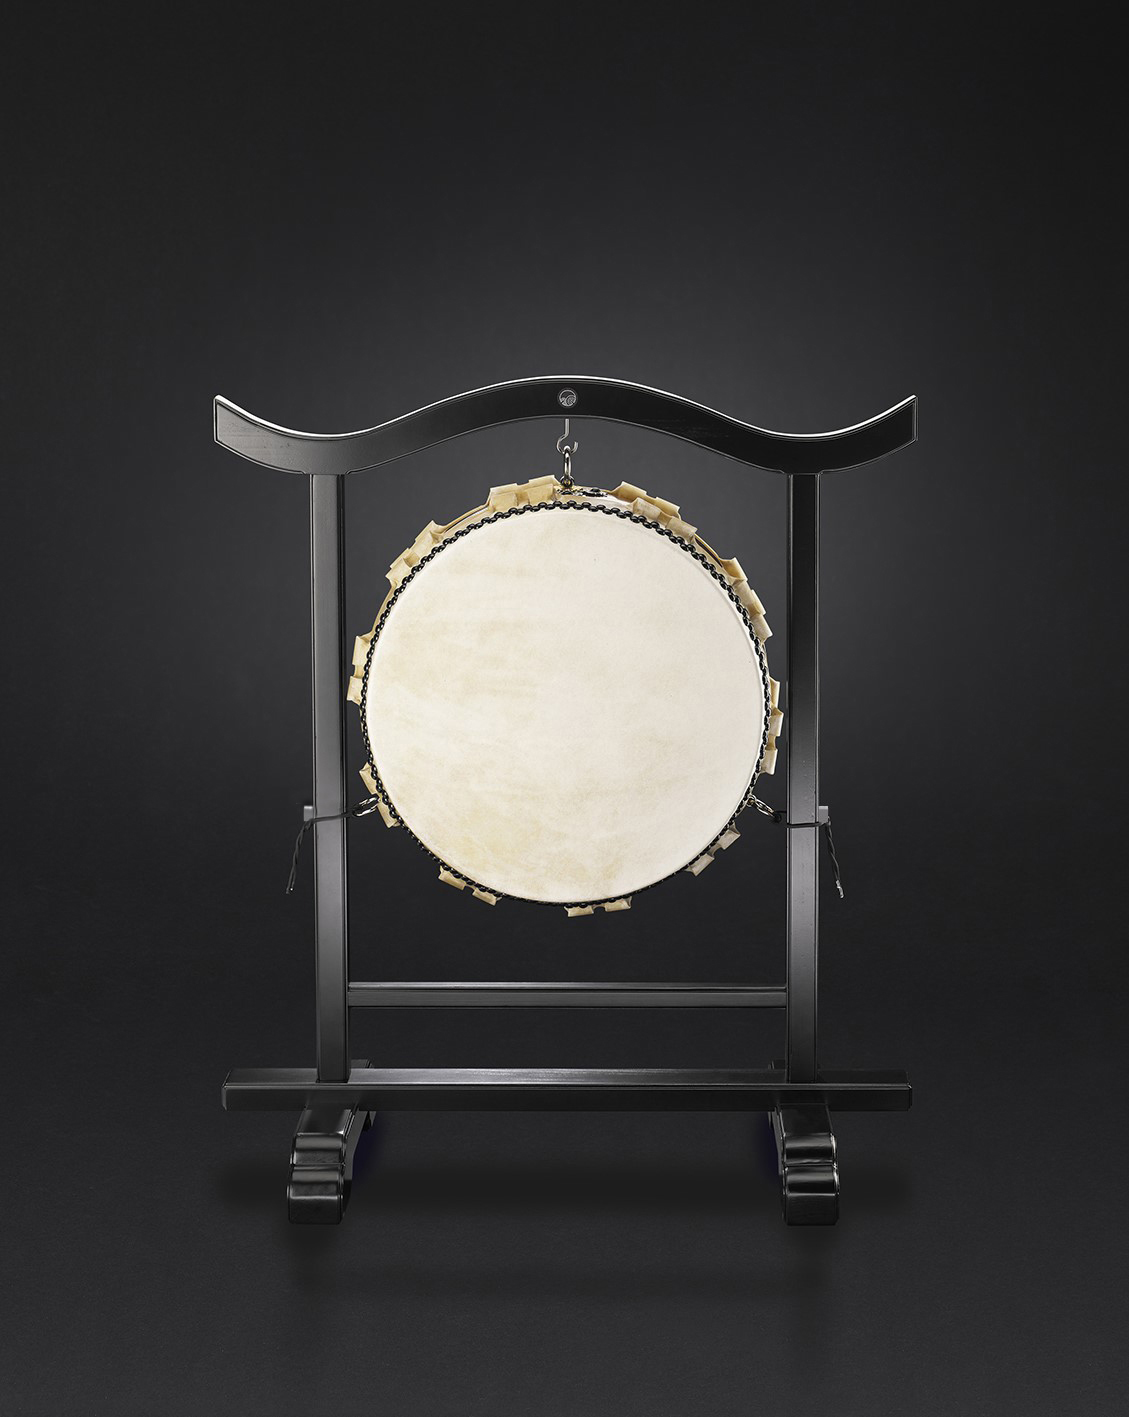 Hira-Daiko hq Ø48cm/h.25cm (695€) with temple stand (295€)